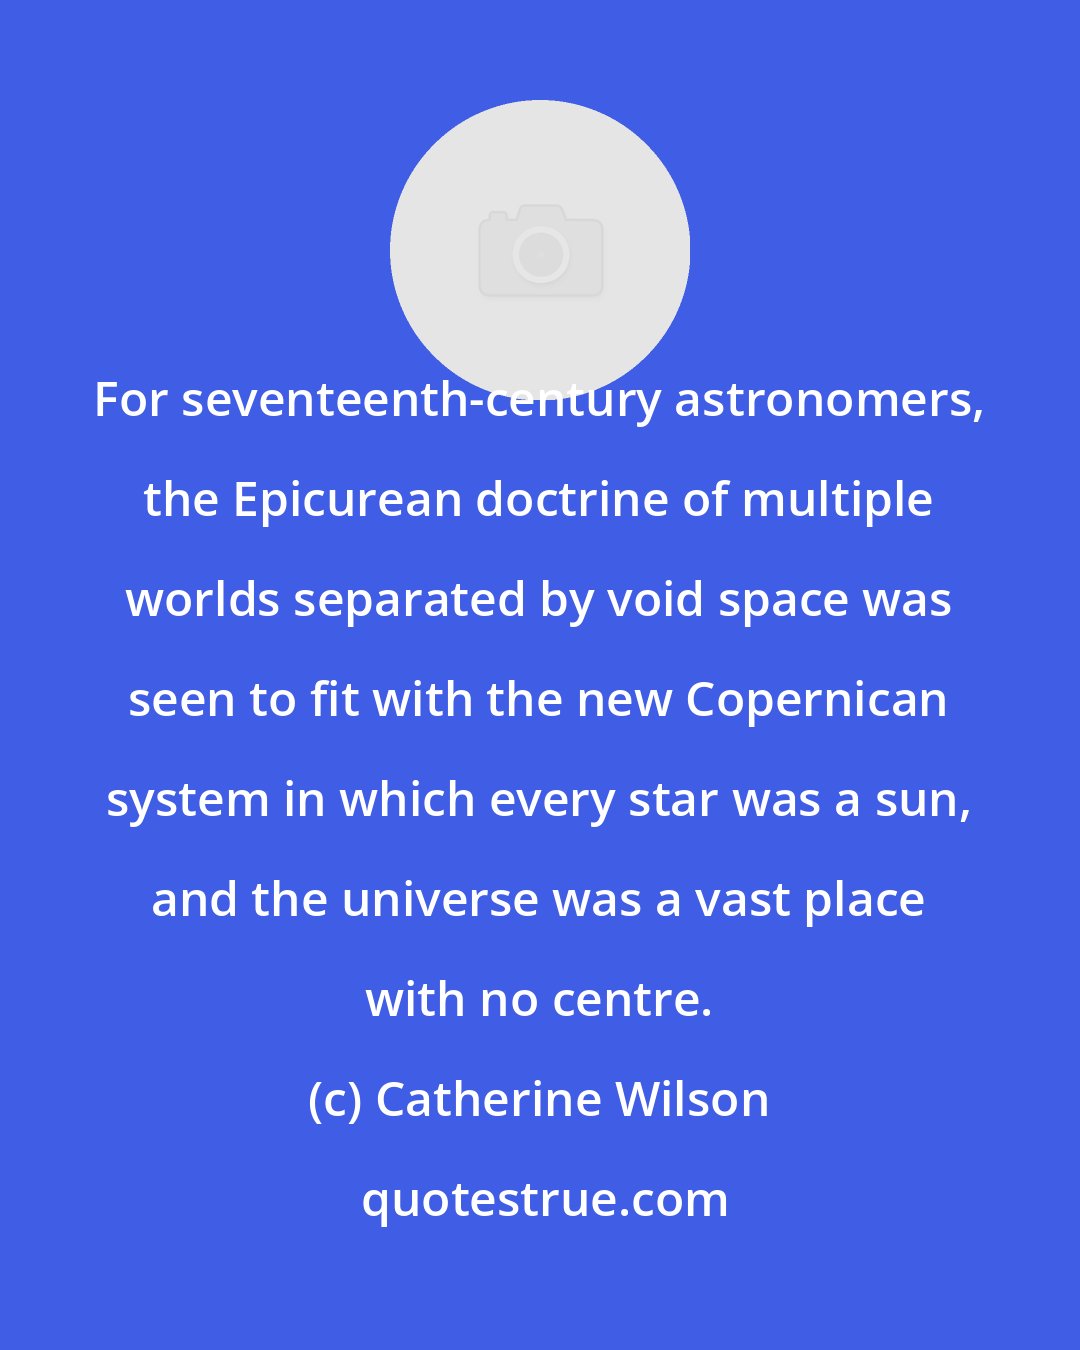 Catherine Wilson: For seventeenth-century astronomers, the Epicurean doctrine of multiple worlds separated by void space was seen to fit with the new Copernican system in which every star was a sun, and the universe was a vast place with no centre.